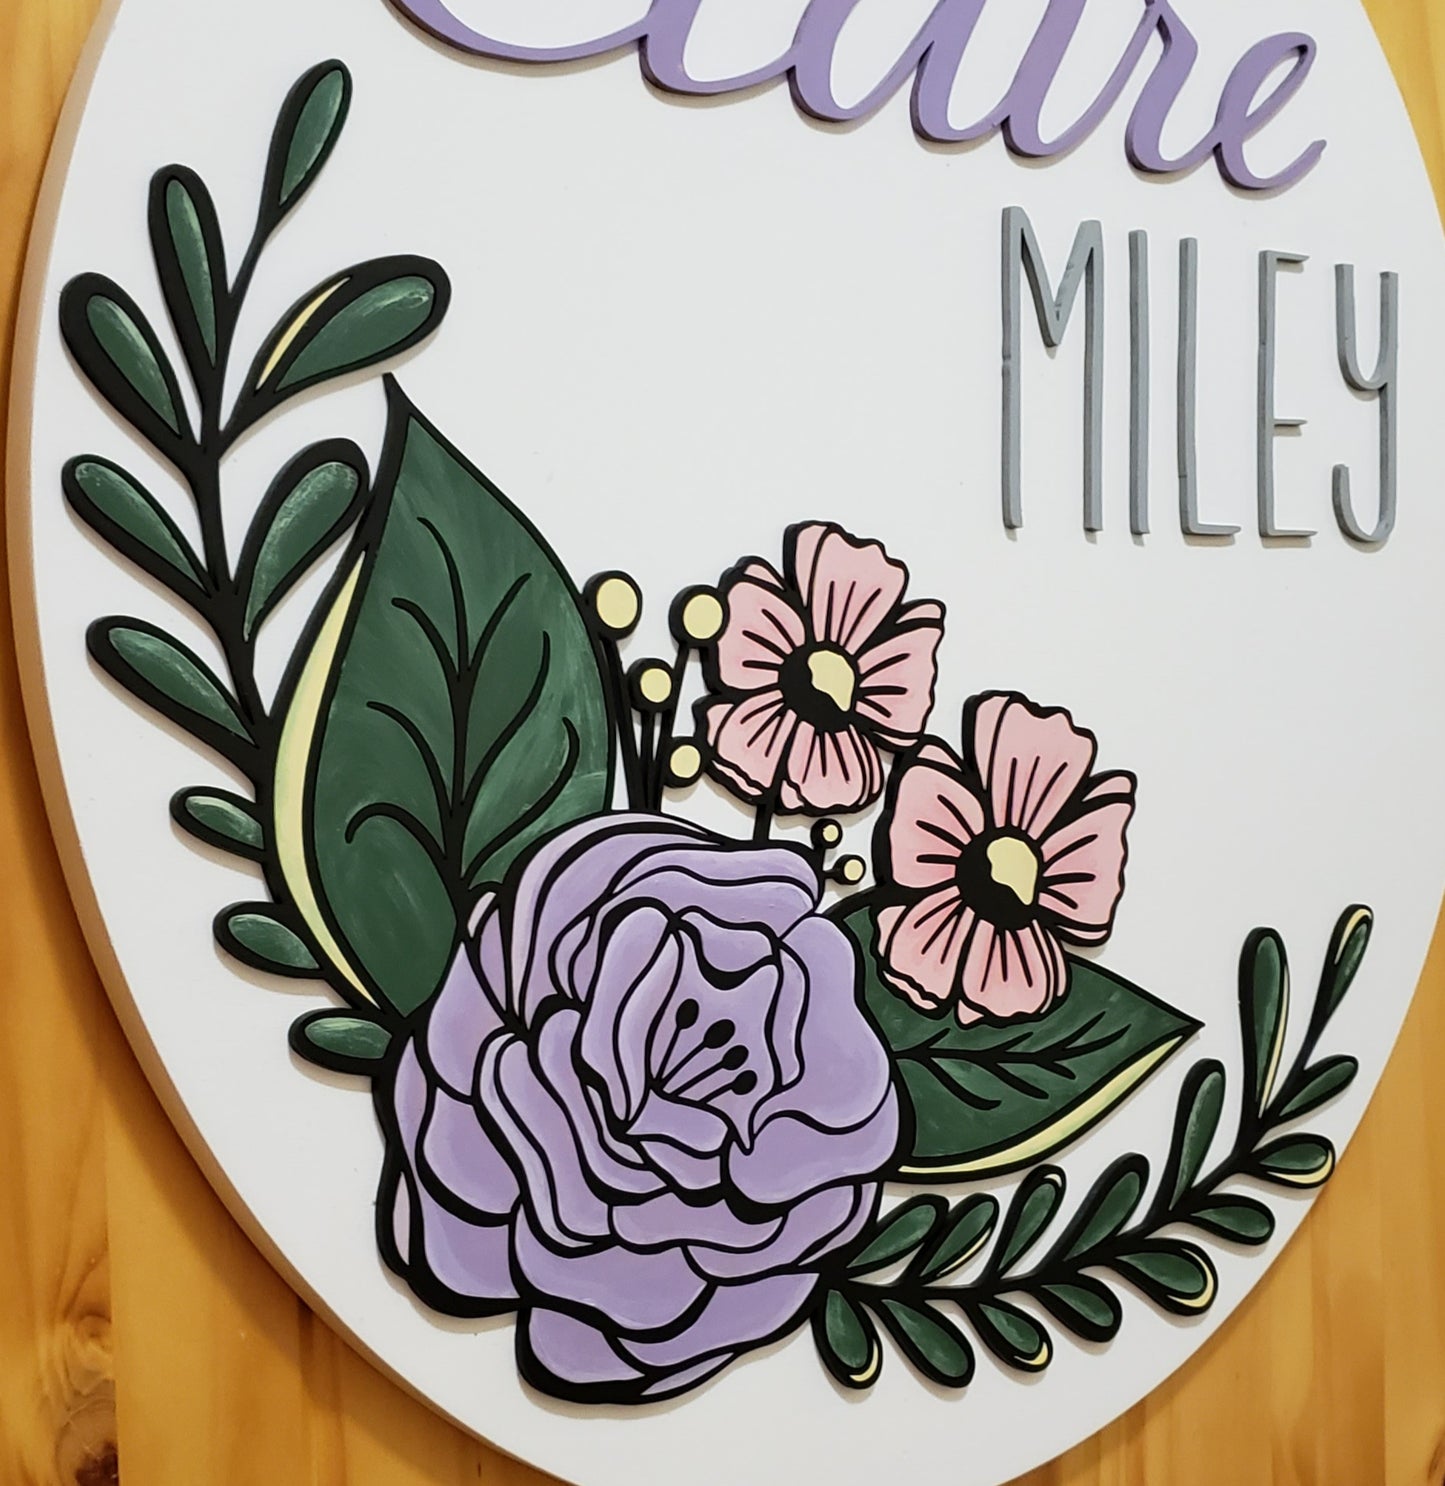 The "Claire" Round Name Sign